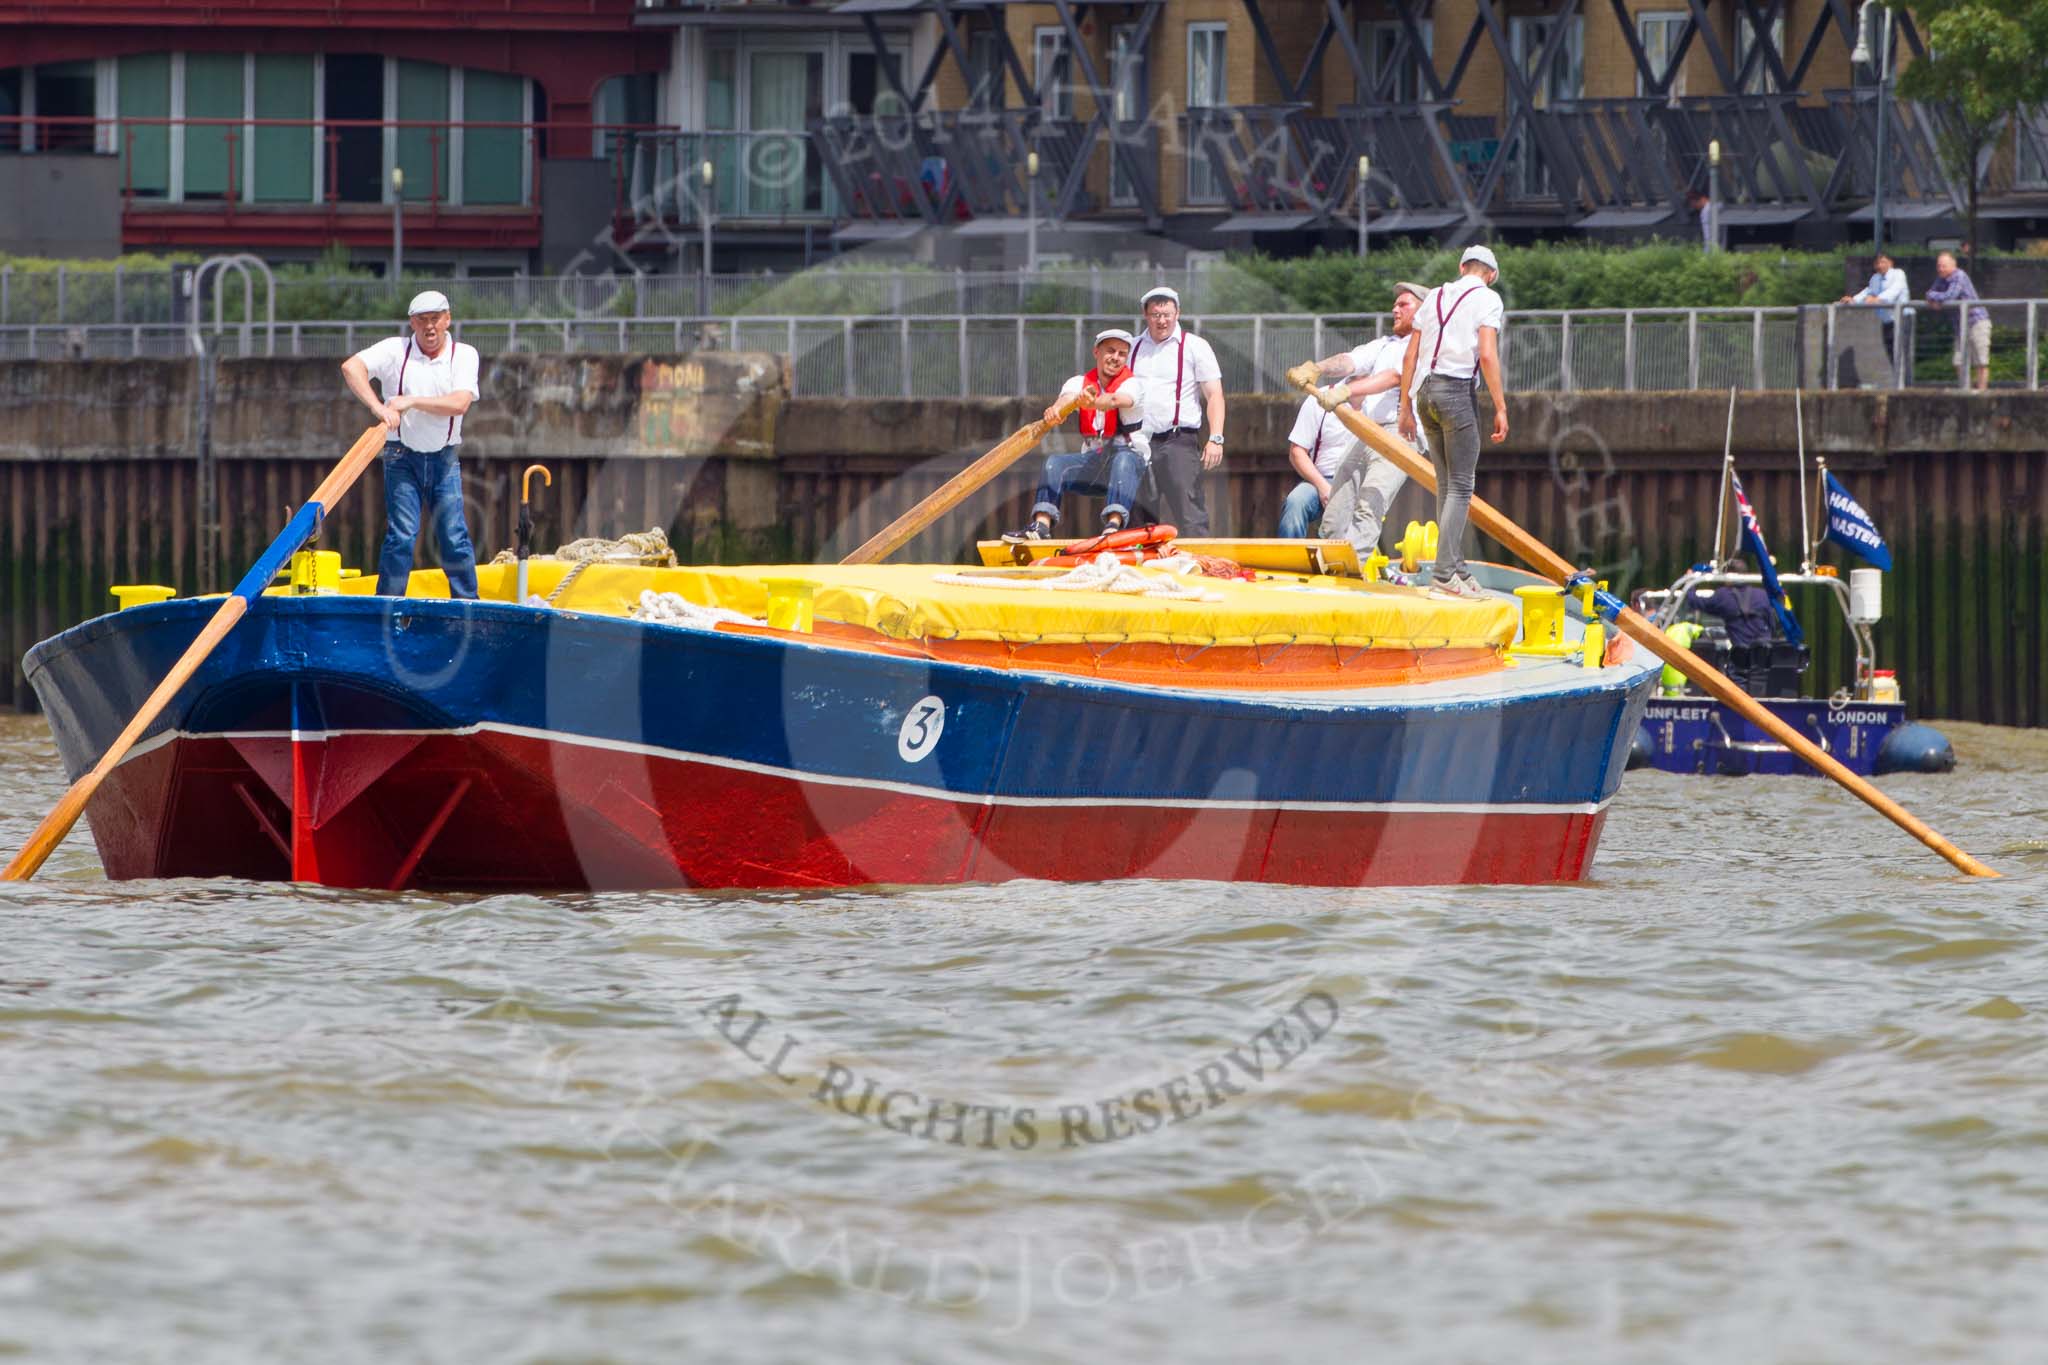 TOW River Thames Barge Driving Race 2014.
River Thames between Greenwich and Westminster,
London,

United Kingdom,
on 28 June 2014 at 12:42, image #123